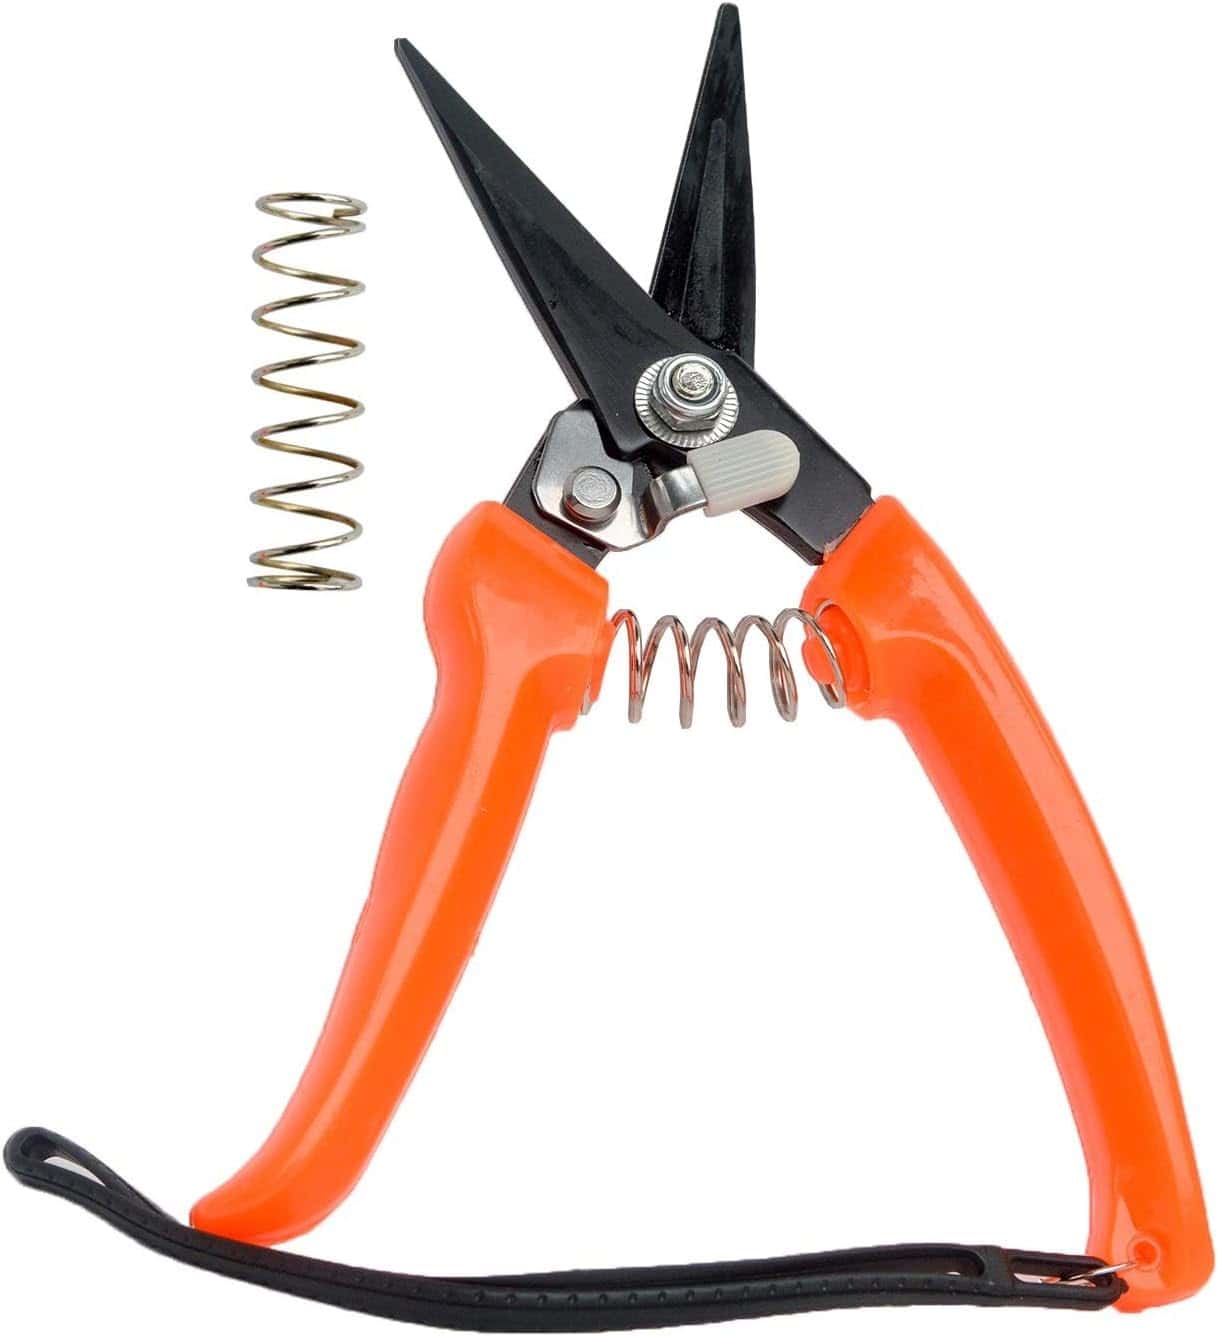 Hoof Trimmers Goat Hoof Trimming Shears Nail Clippers